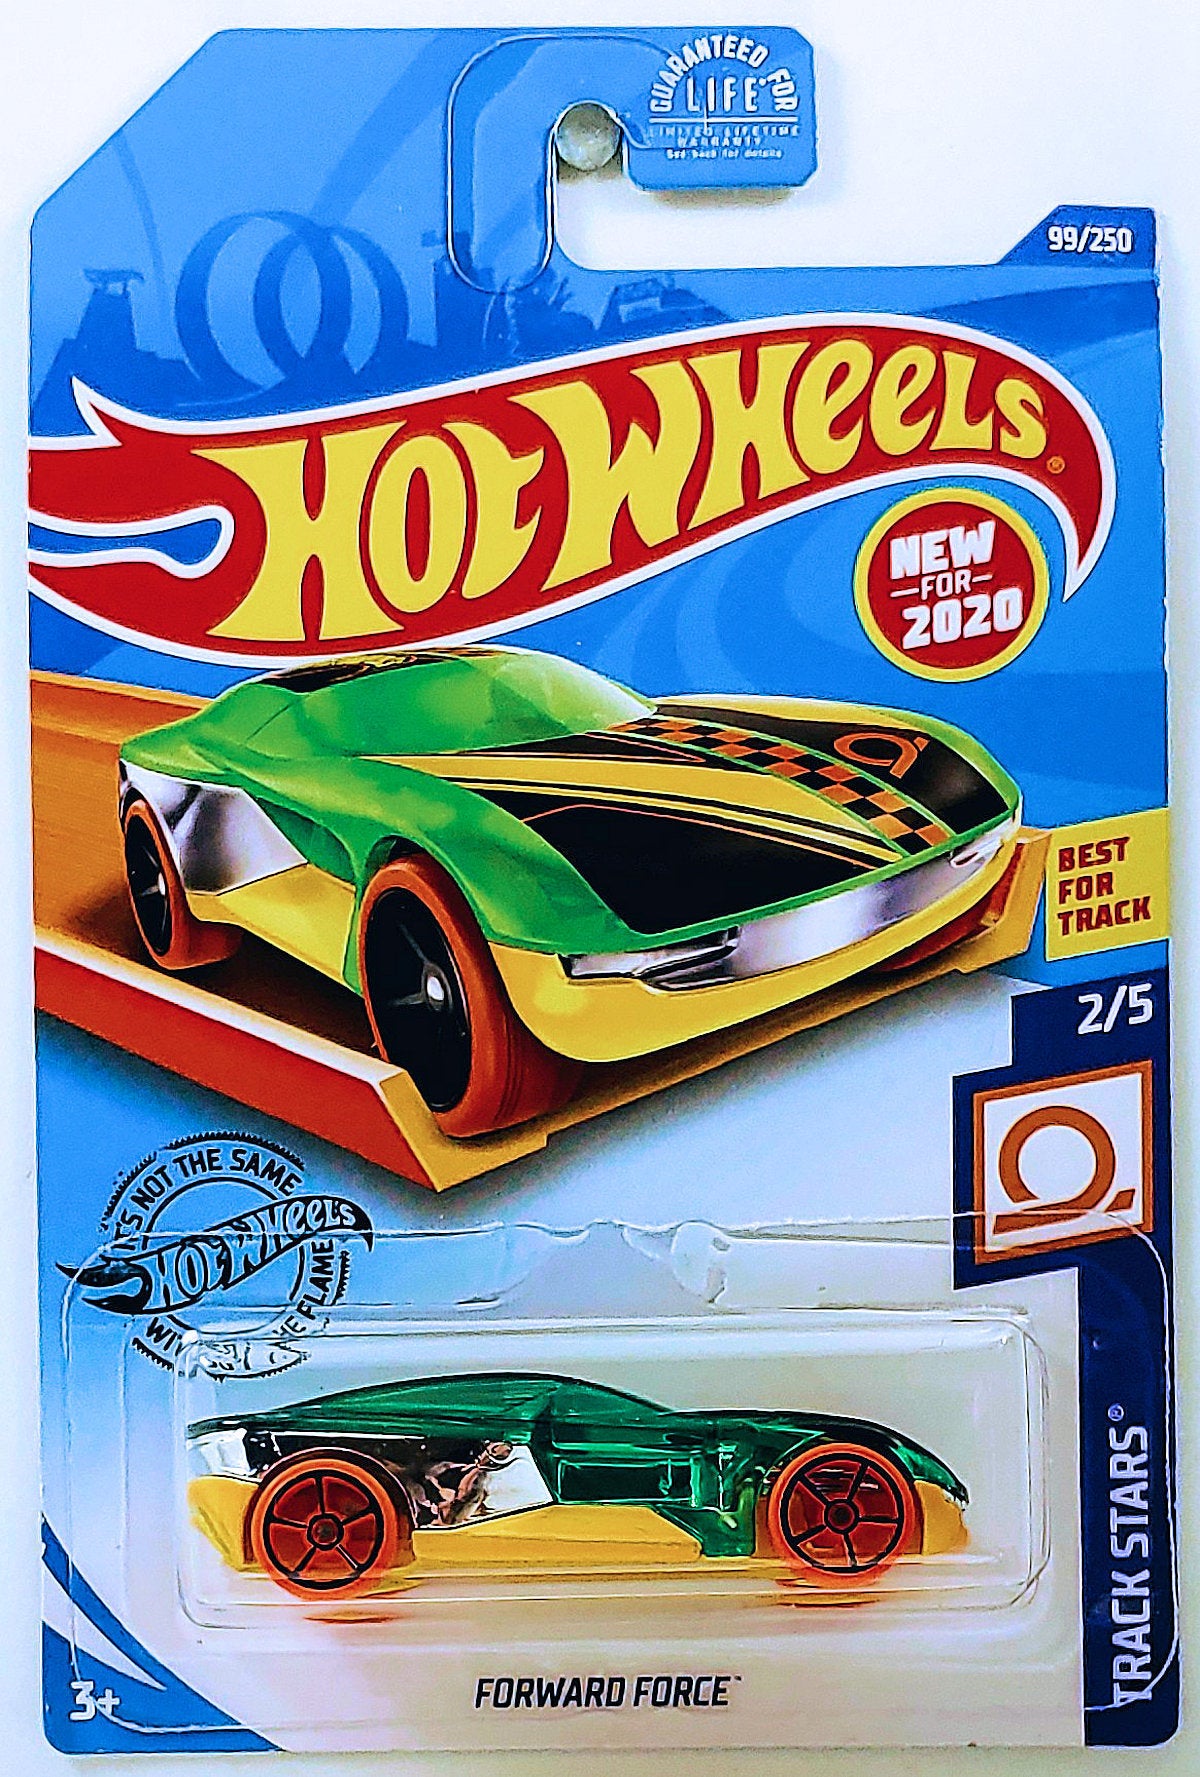 Hot Wheels 2020 - Collector # 099/250 - Track Stars 2/5 - New Models - Forward Force - Green